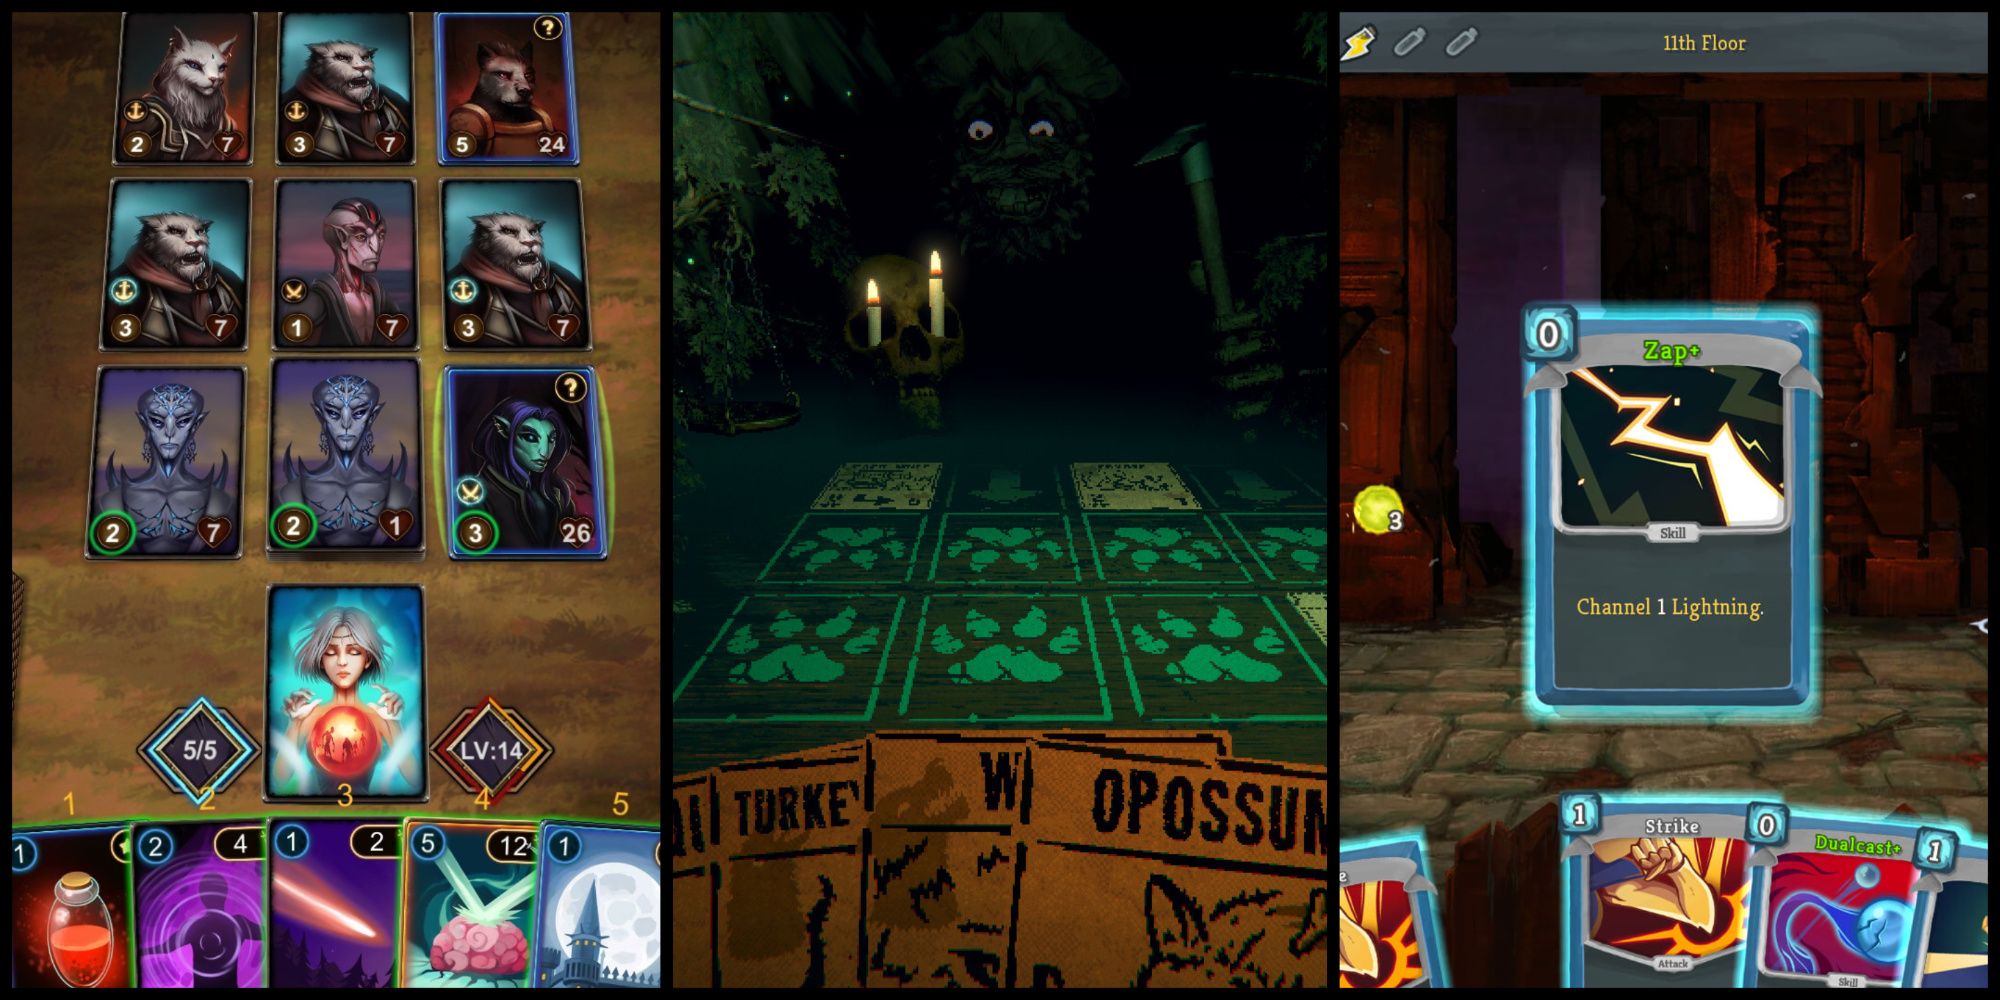 Screenshots from Dark Mist, Inscryption, and Slay the Spire